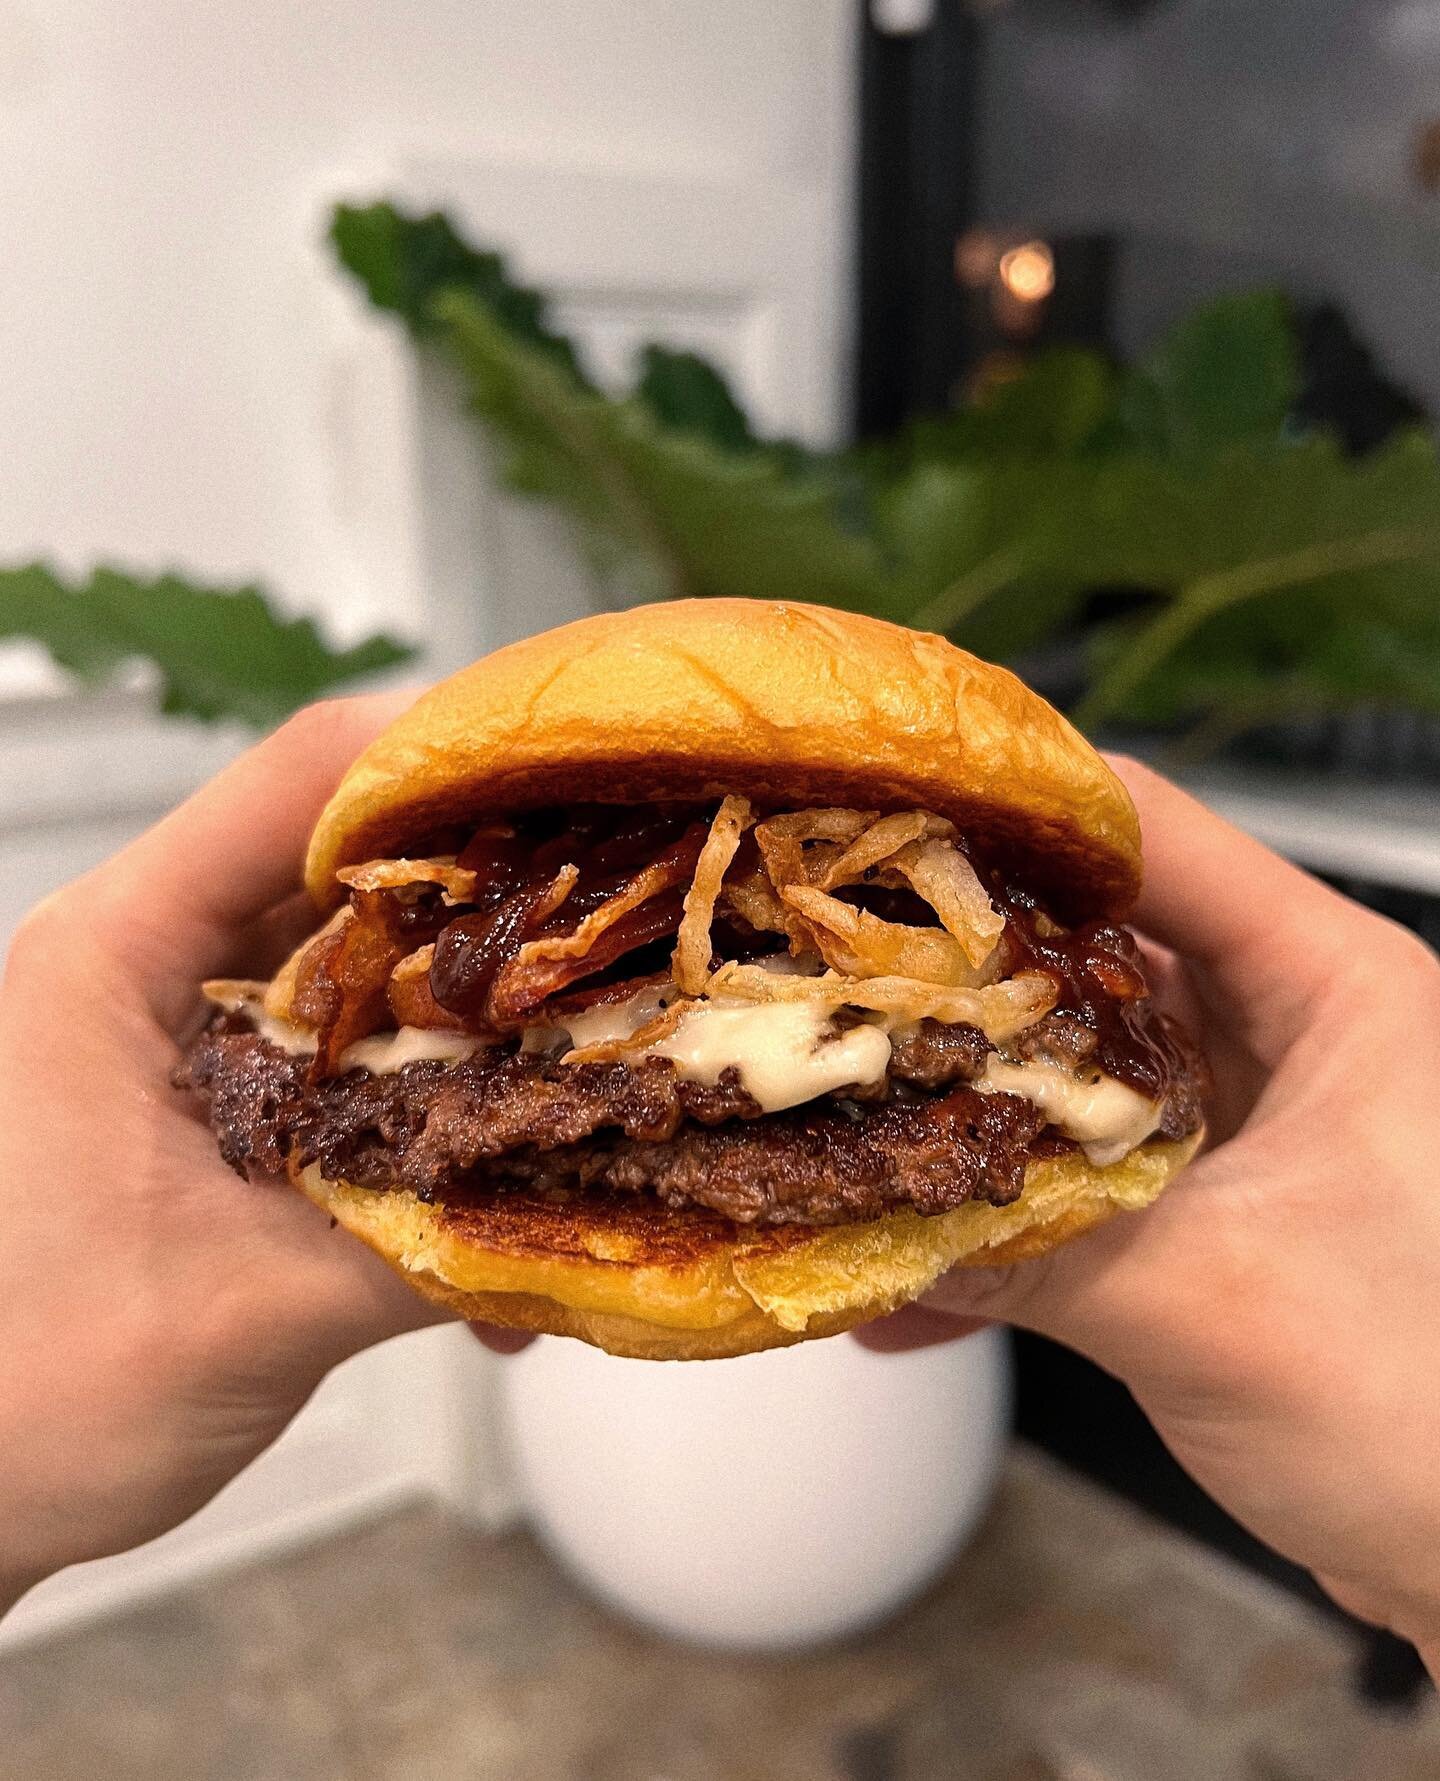 Happy Wednesday 🤎 Cure your cravings and come by for a burger! Our staff favorite is our Old Town Western 🤠 Paired perfectly with garlic fries &amp; our house-made buttermilk ranch 🤤
.
.
.
.
.
.
.
.
.
#lanasoakland #bayareafood #bayareabites #baya